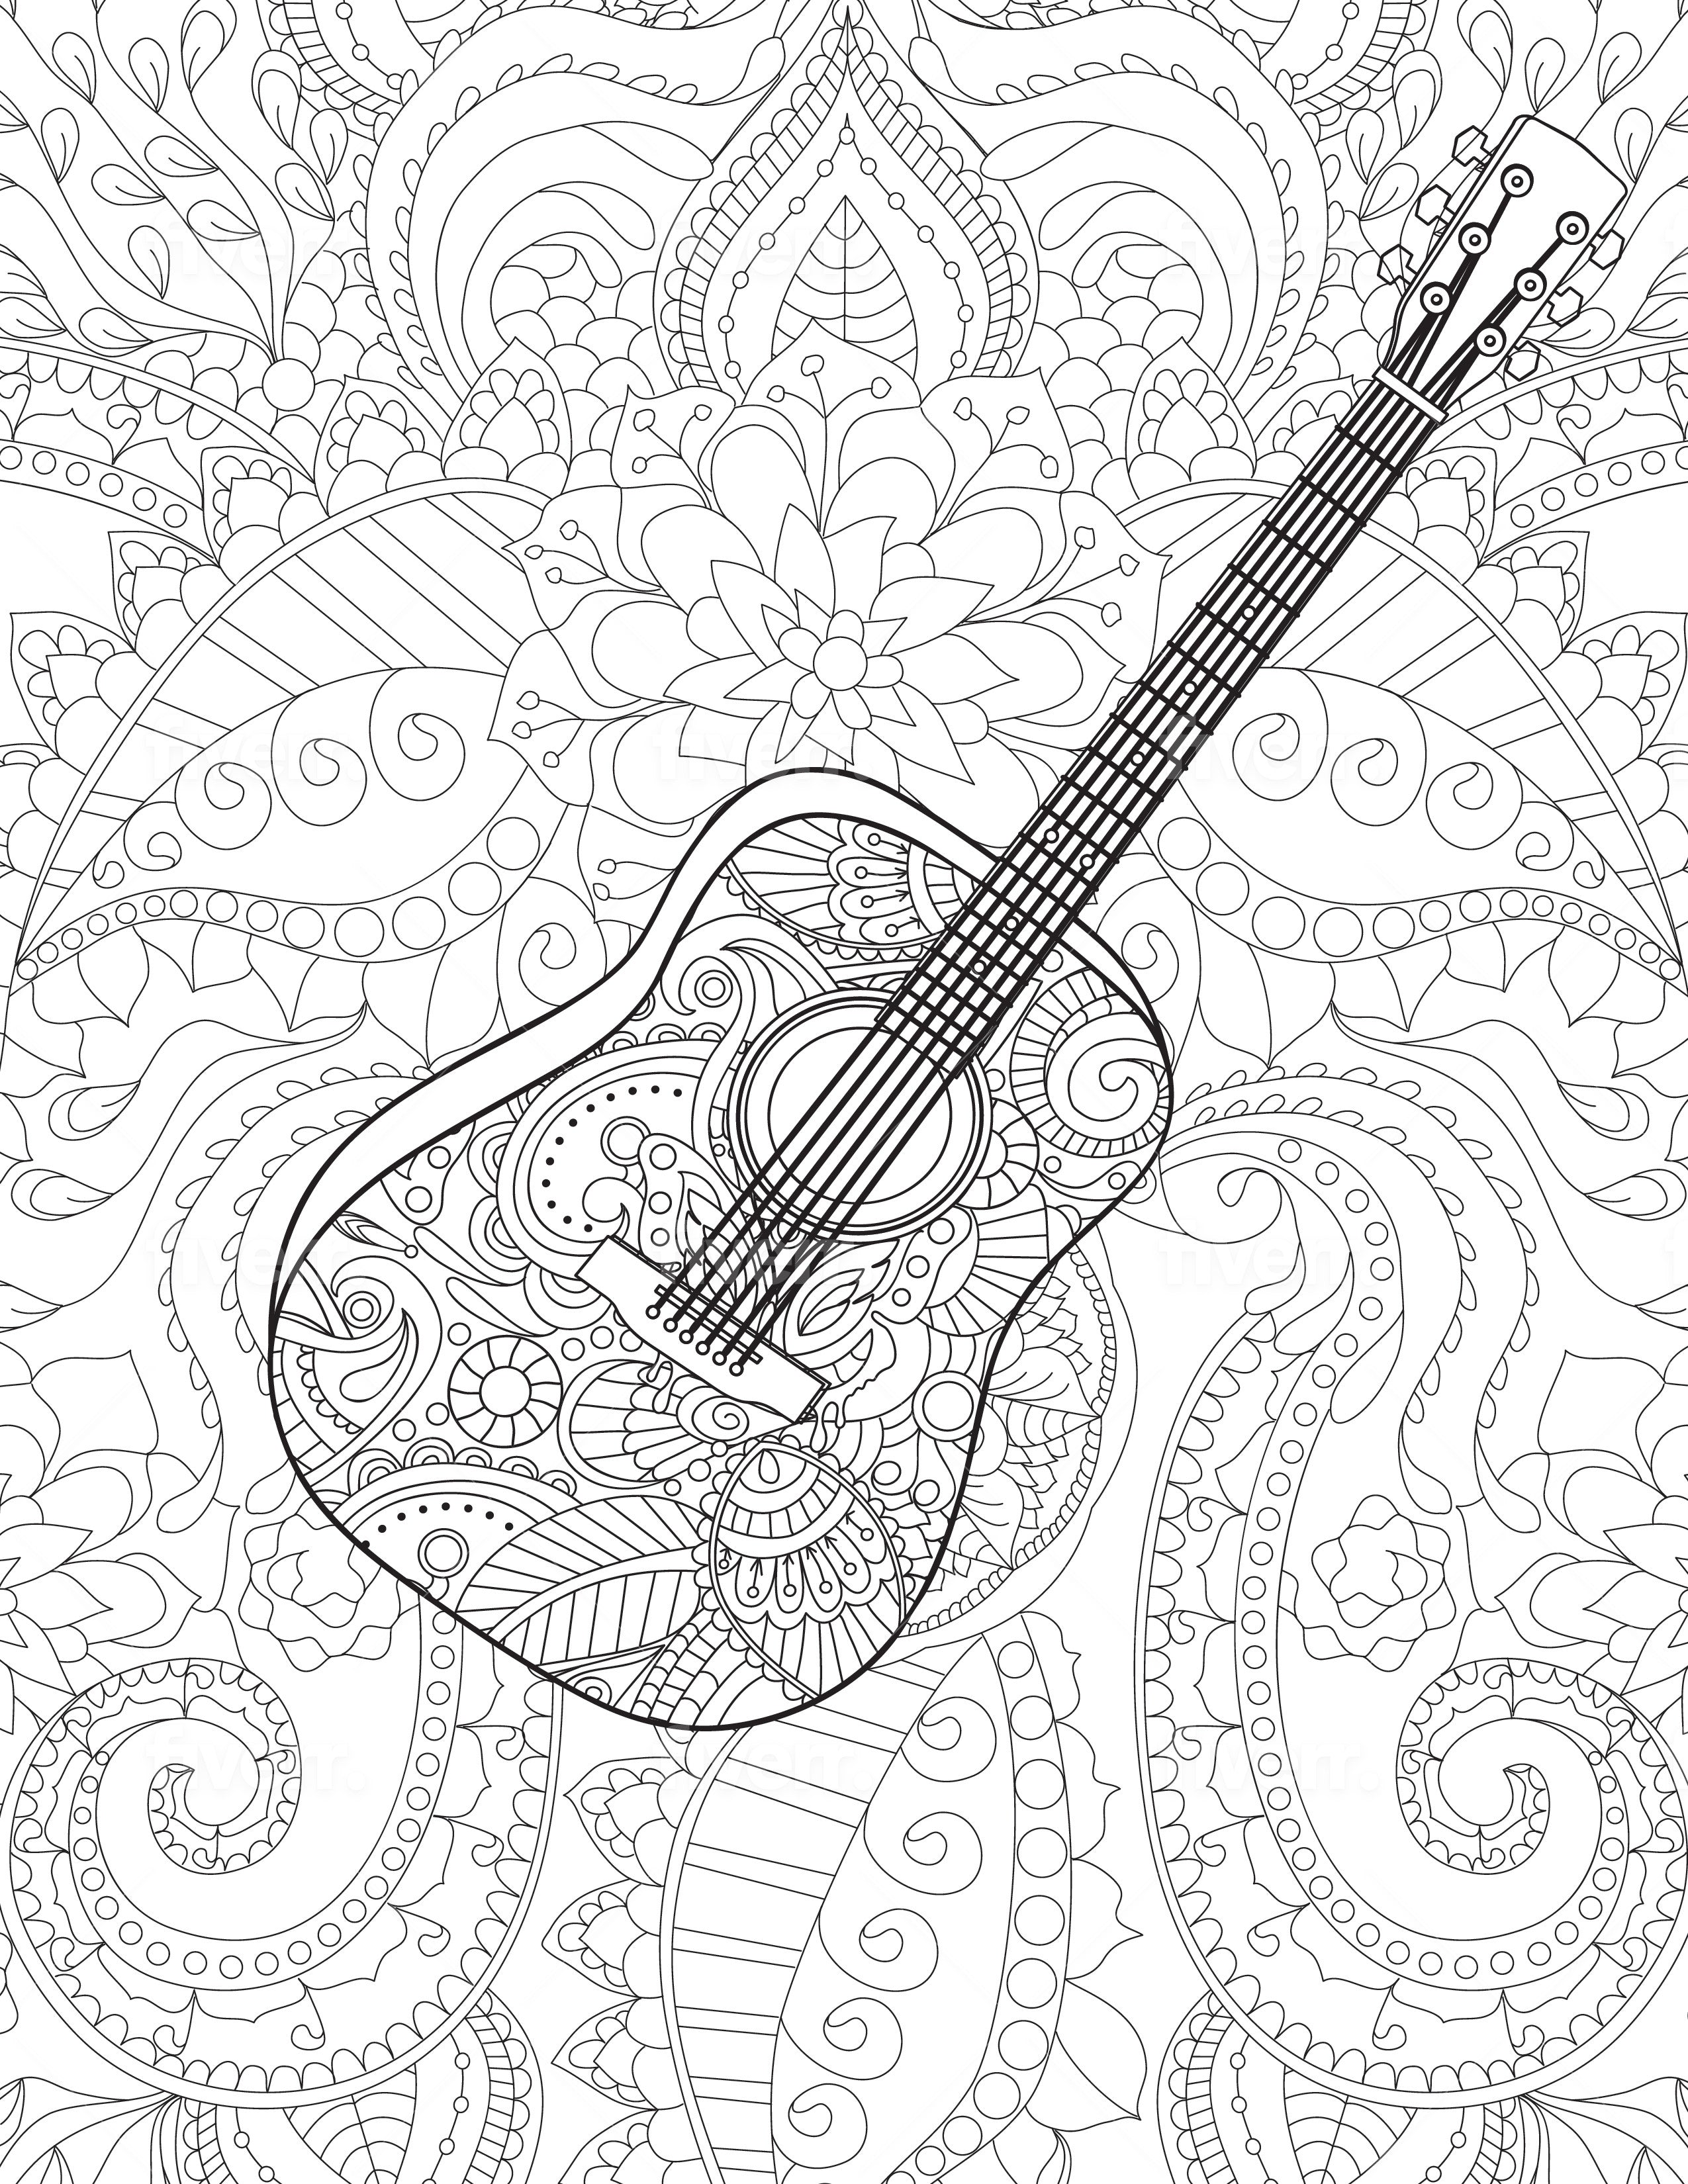 acoustic guitar coloring page